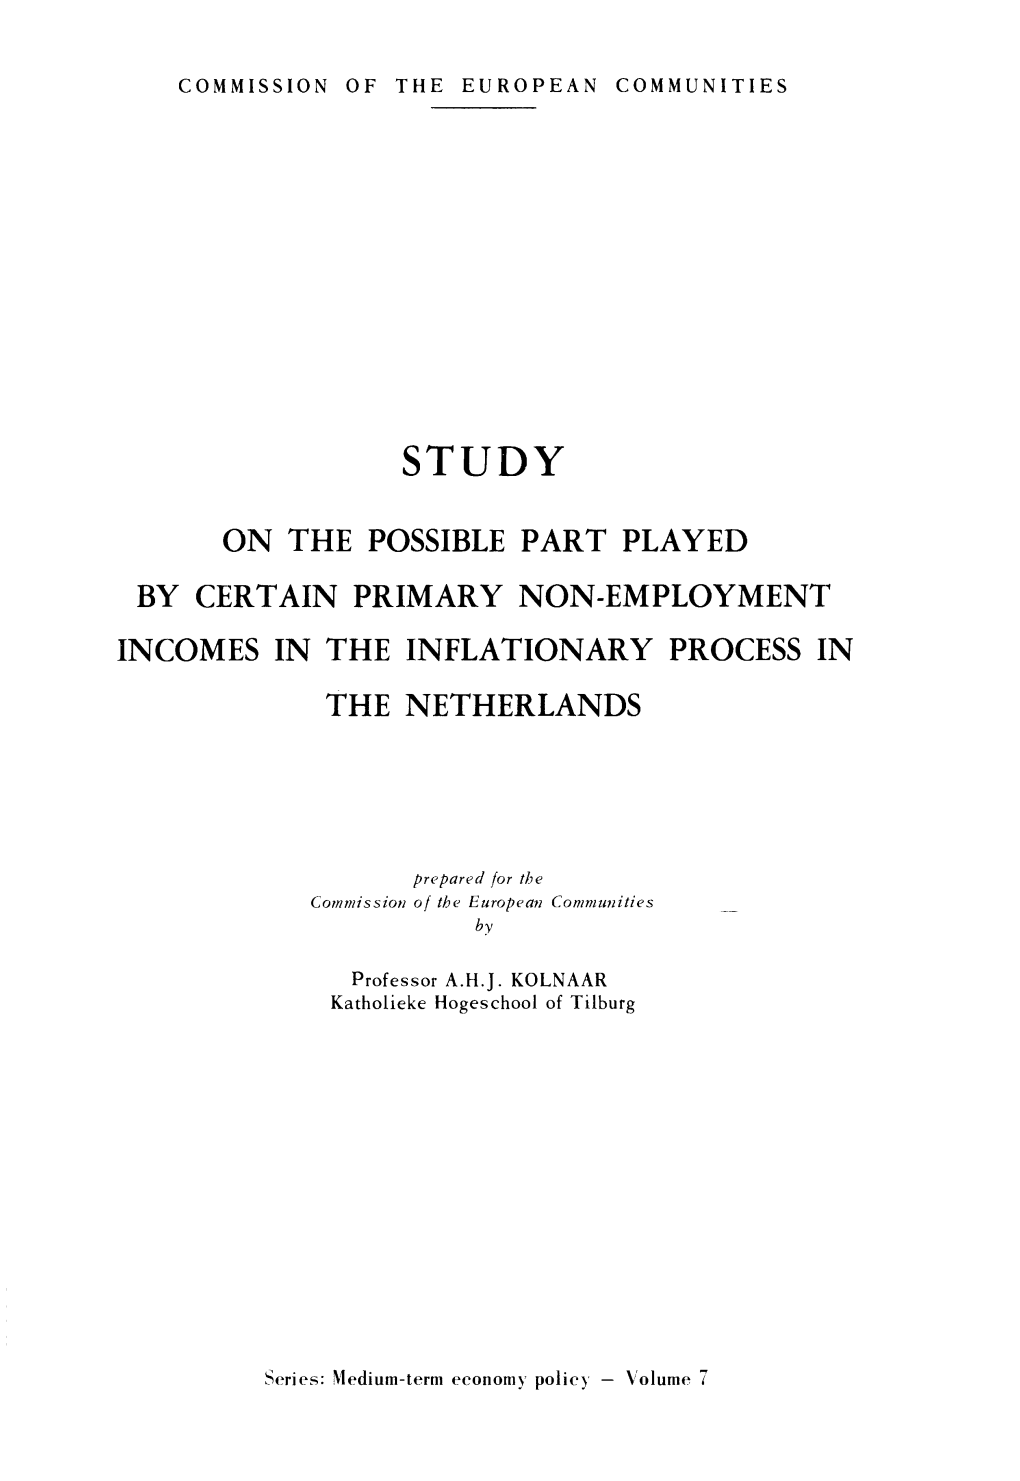 On the Possible Part Played by Certain Primary Non-Employment Incomes in the Inflationary Process in the Netherlands